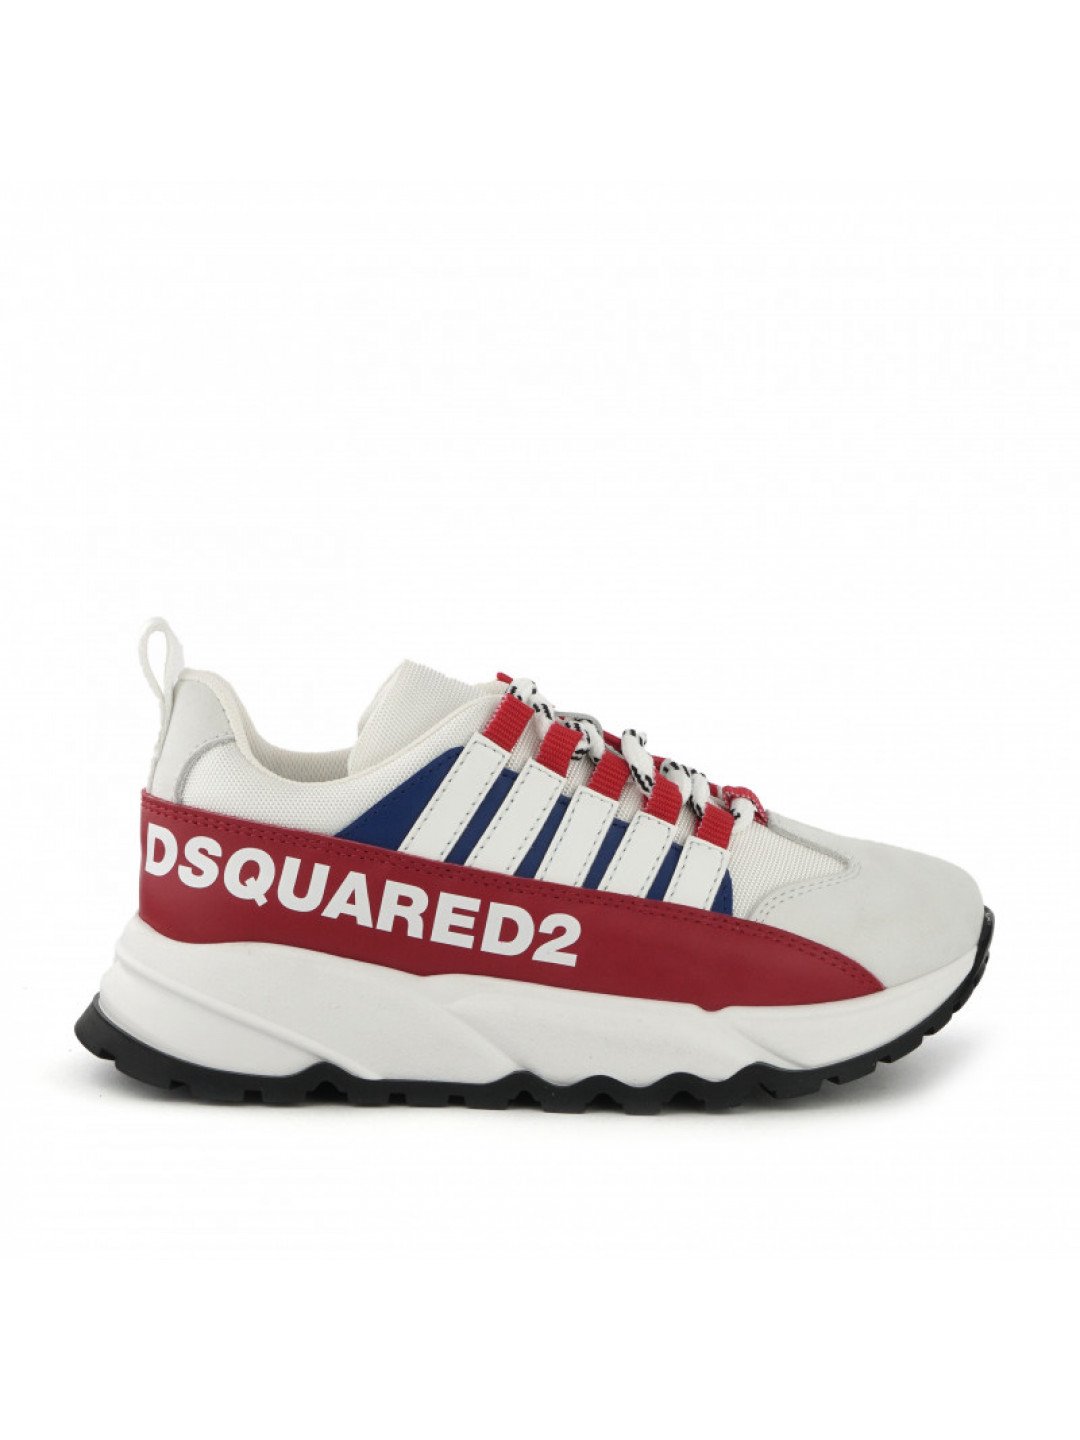 Tenisky dsquared logo leather & tech free sneakers low lace up bílá 34